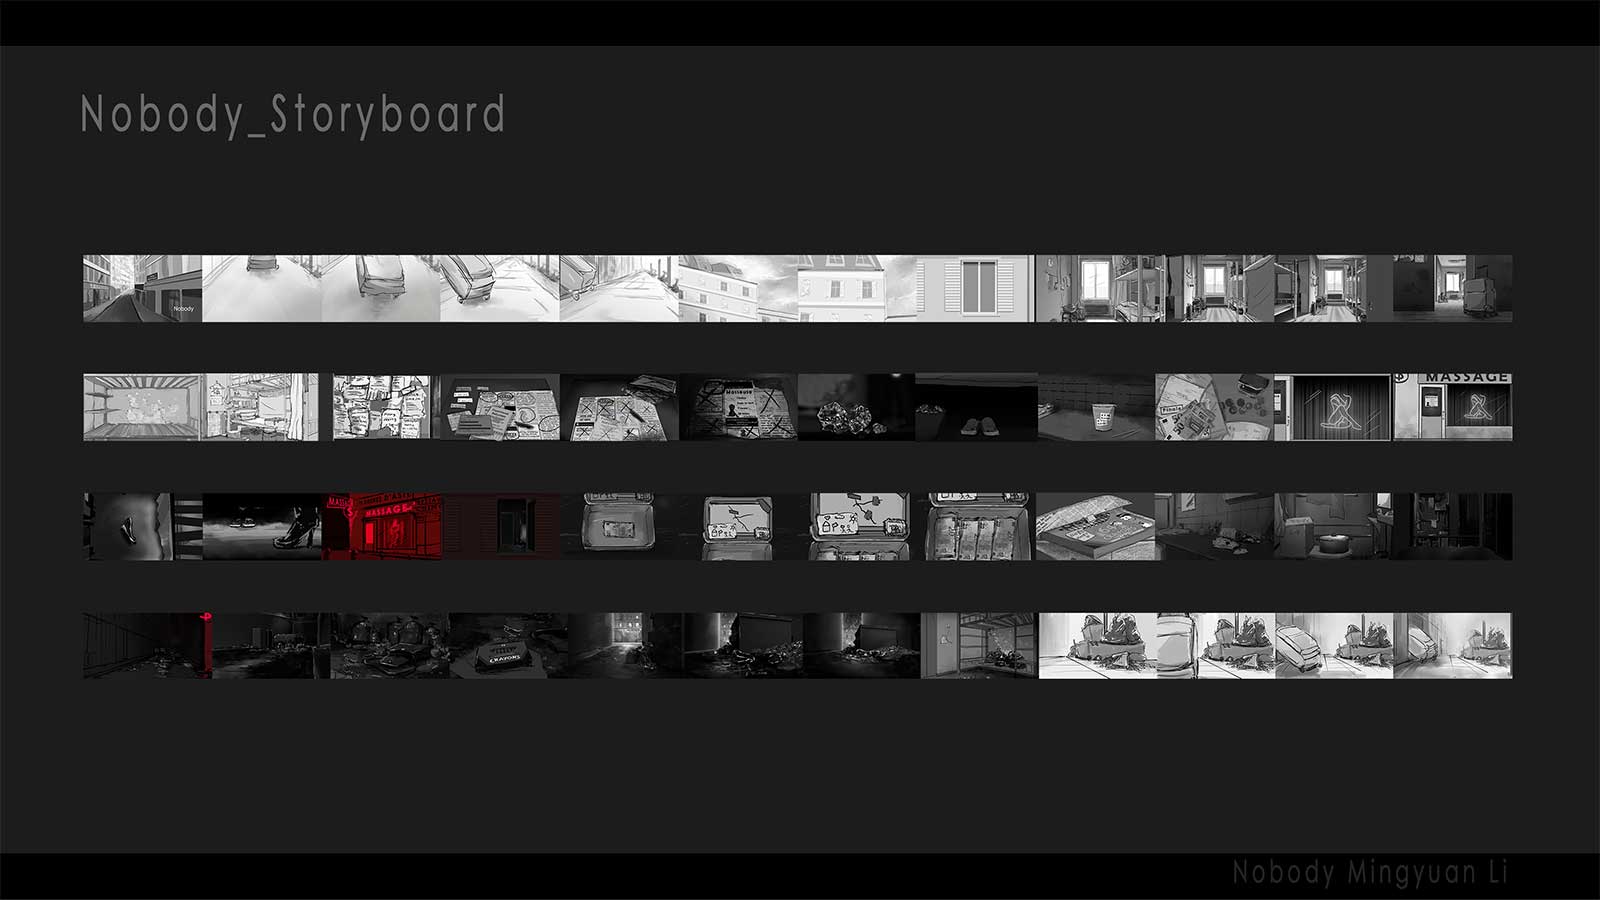 The storyboards for Nobody.